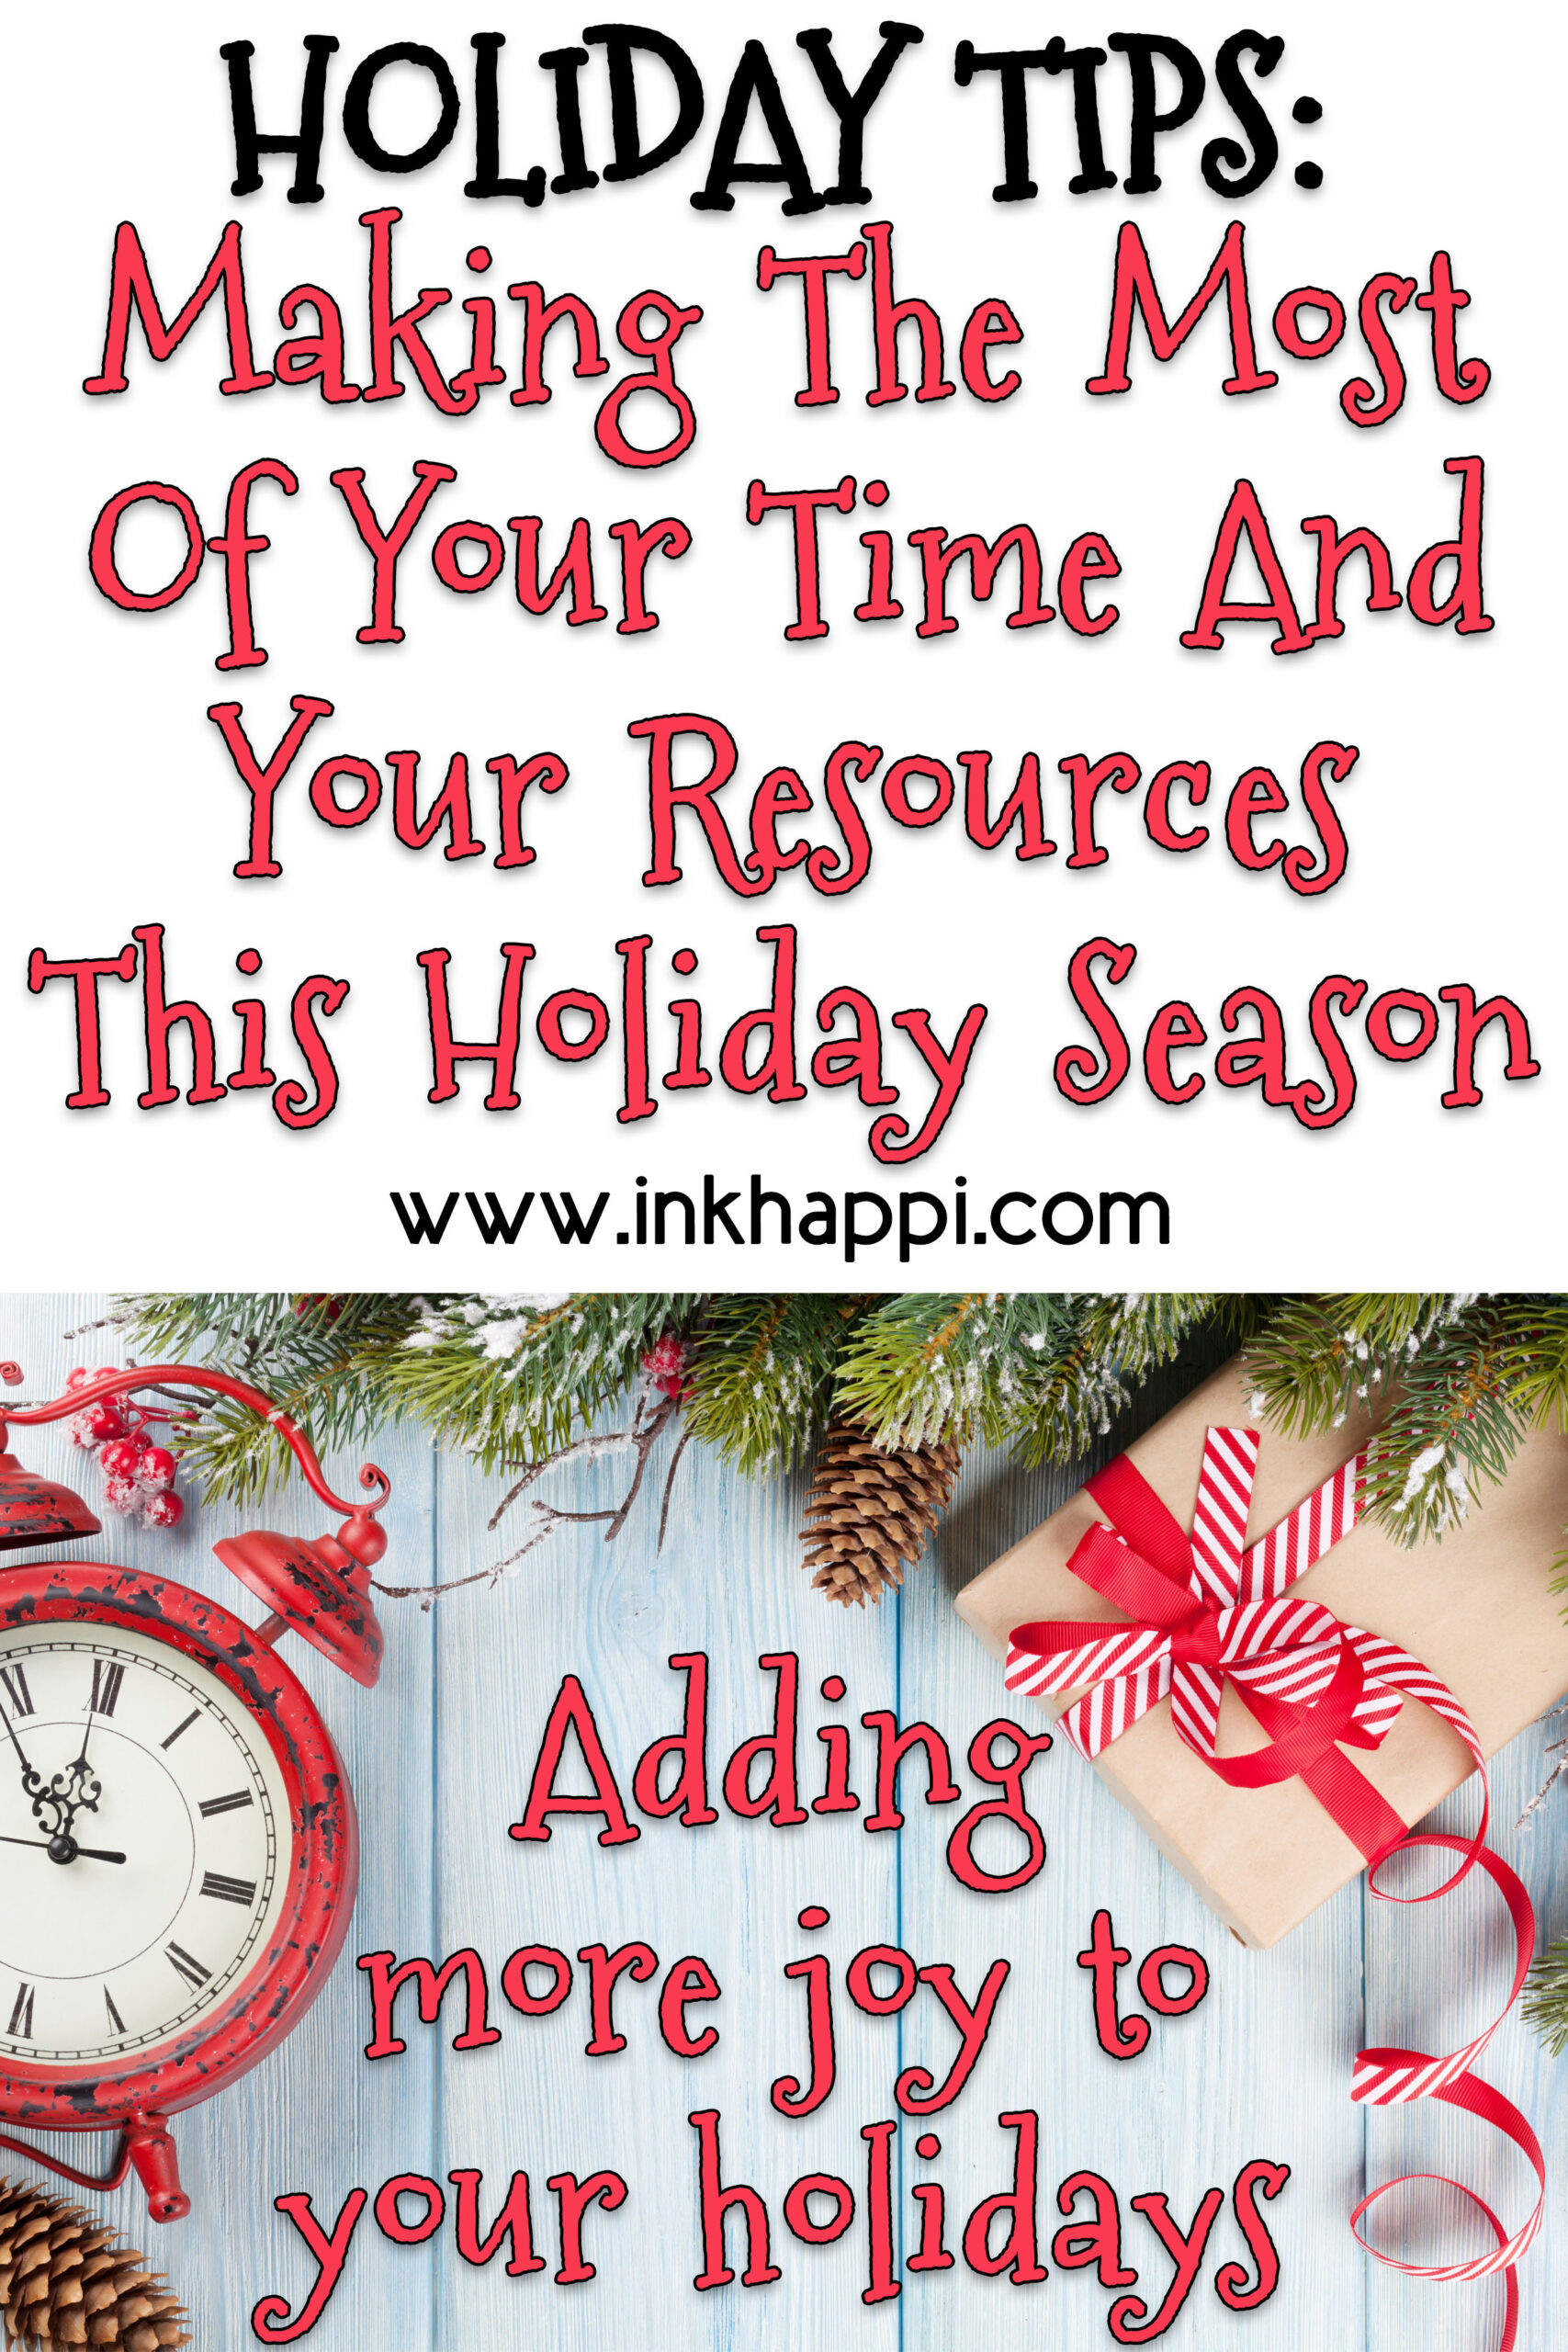 Holiday Tips: Making The Most Of Your Time And Your Resources This Holiday Season!